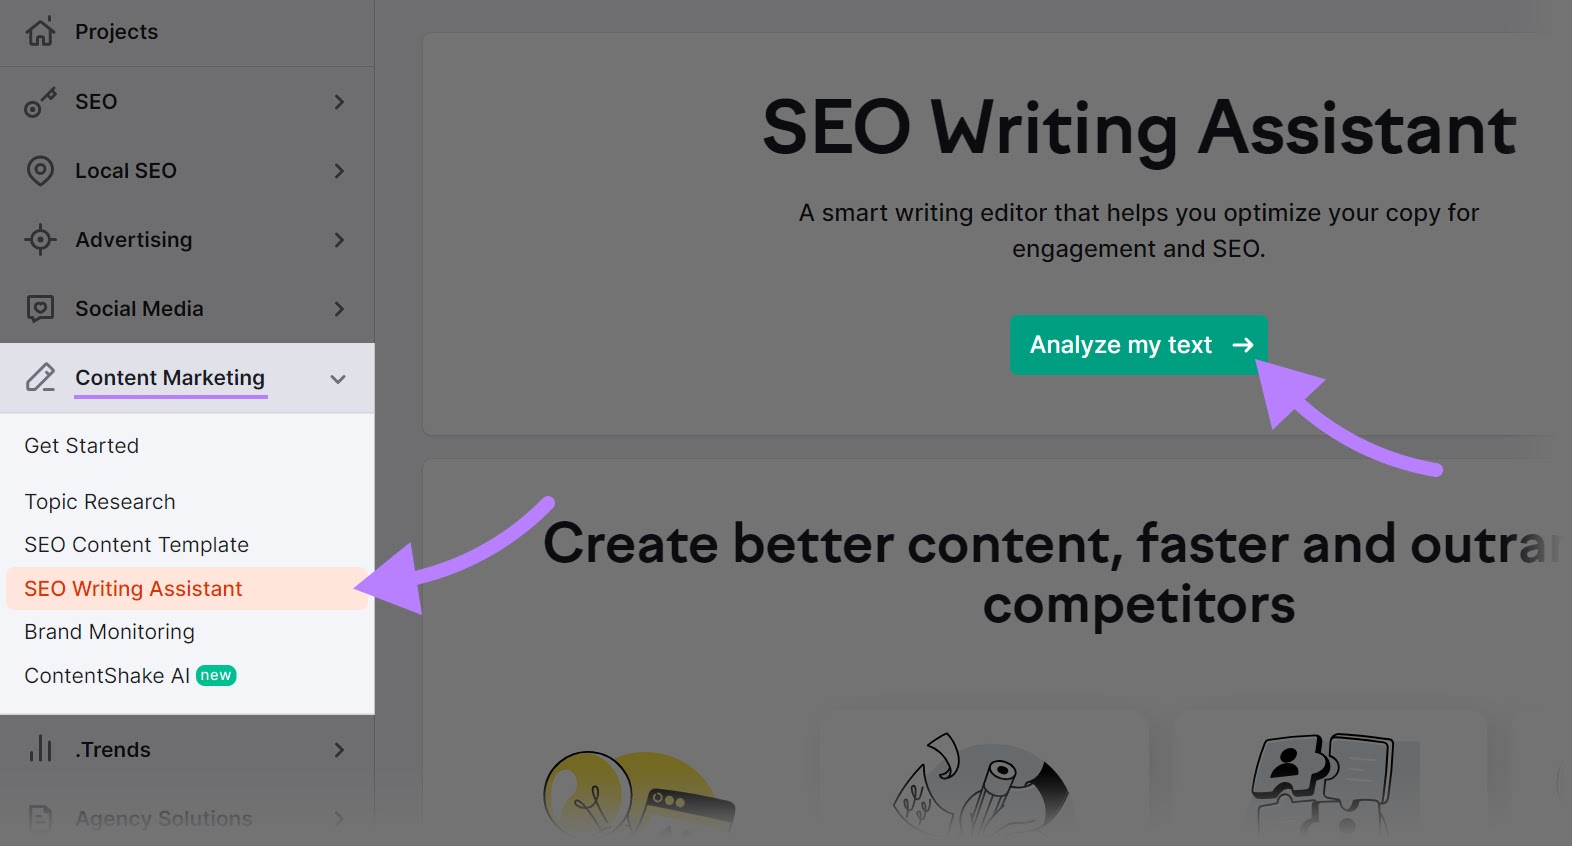 Navigating to "SEO Writing Assistant" in Semrush dashboard